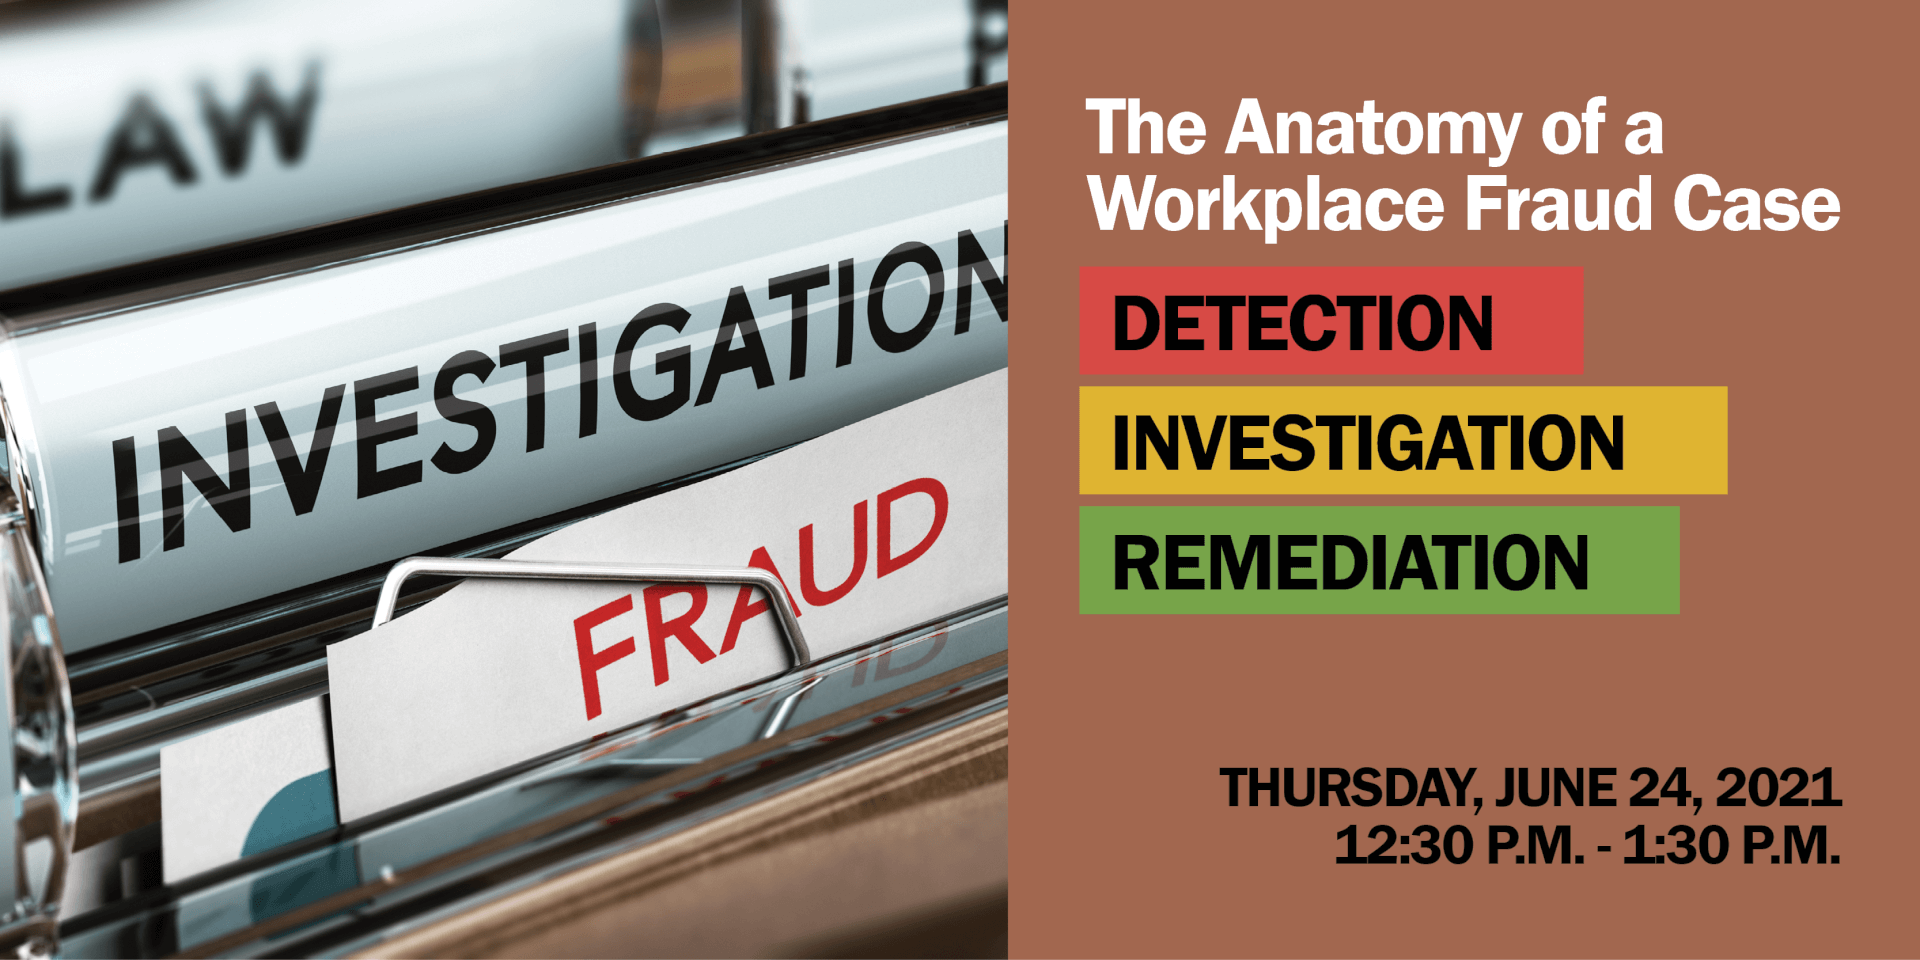 Photo of file folders and text that says The Anatomy of a Workplace Fraud Case . Detection. Investigation. Remediation. Thursday, June 24, 2021, 12:30 - 1:30 PM